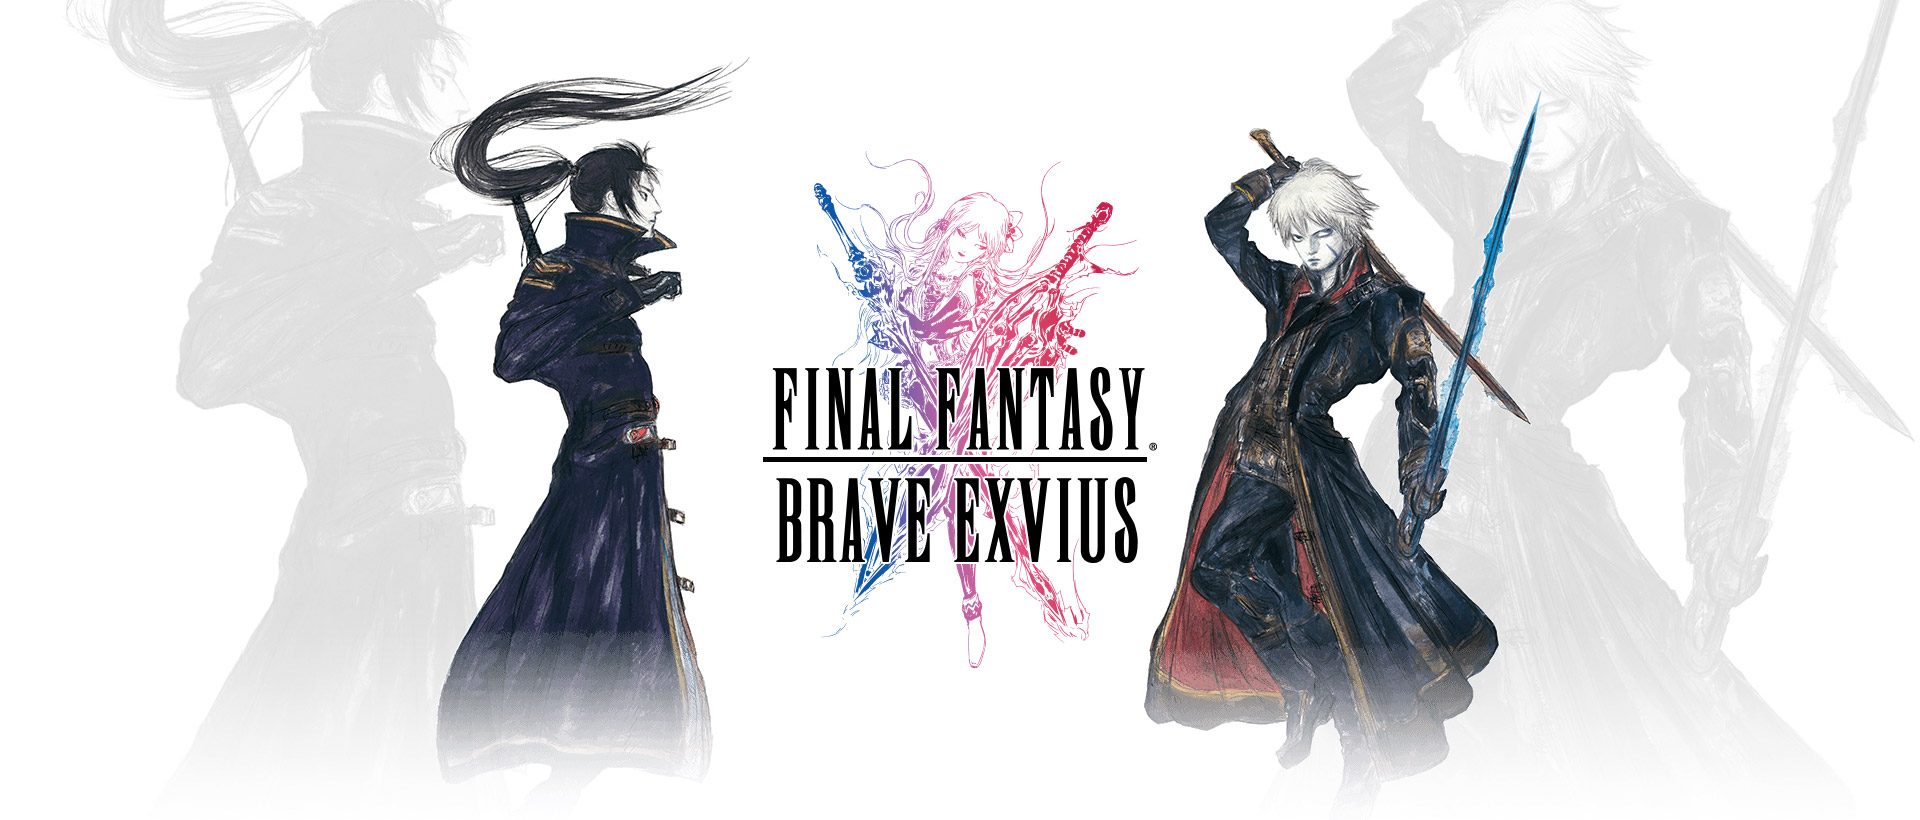 Download & Play Final Fantasy Brave Exvius on PC & Mac with NoxPlayer (Emulator)